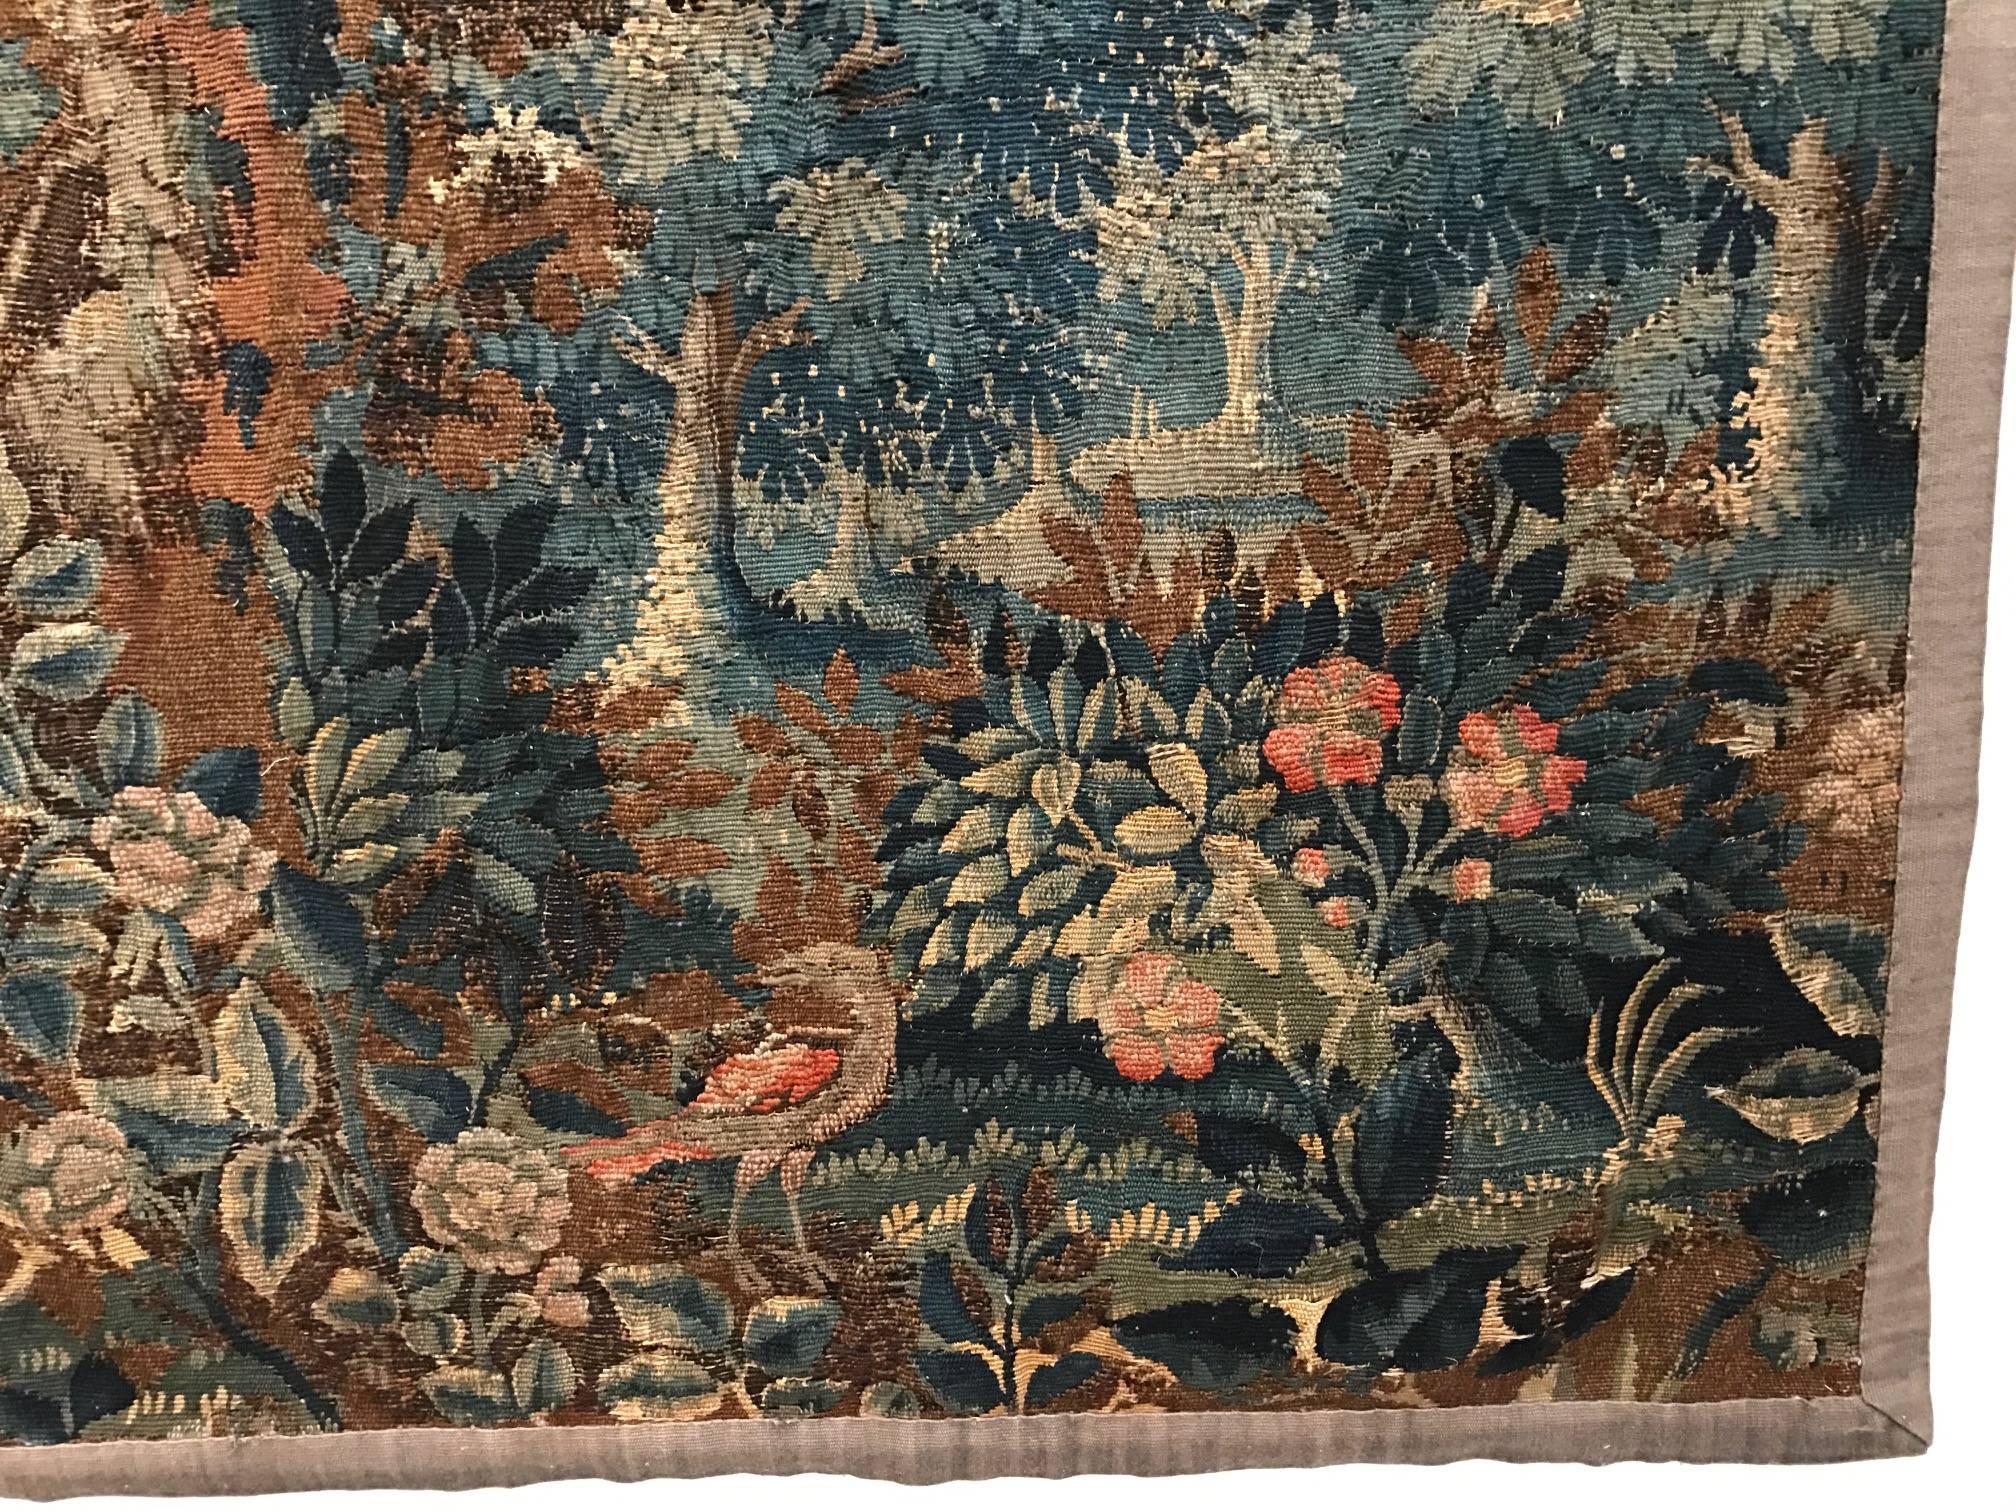 Tapestry panel, Franco-Flemish. Depicting a lush and wooded forest with flora and fauna receding to a distant village.